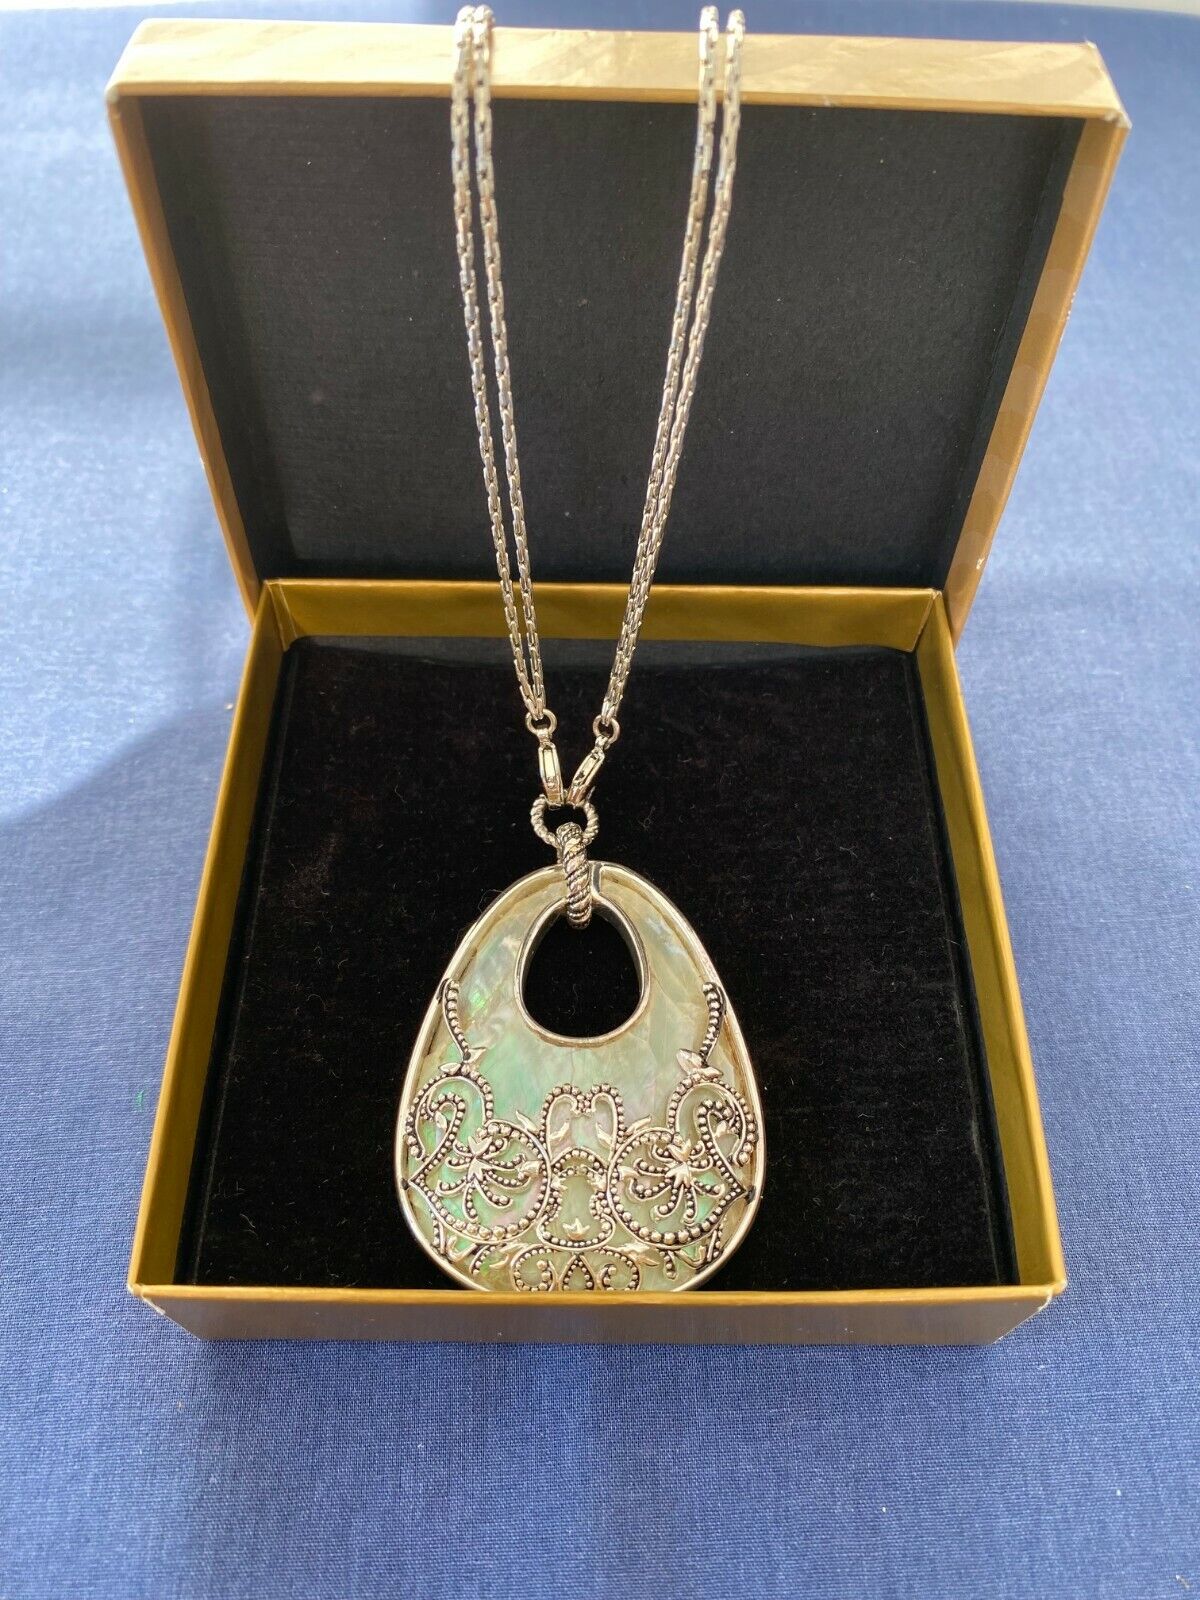 Beautiful Vintage Monet Pendant With Chain